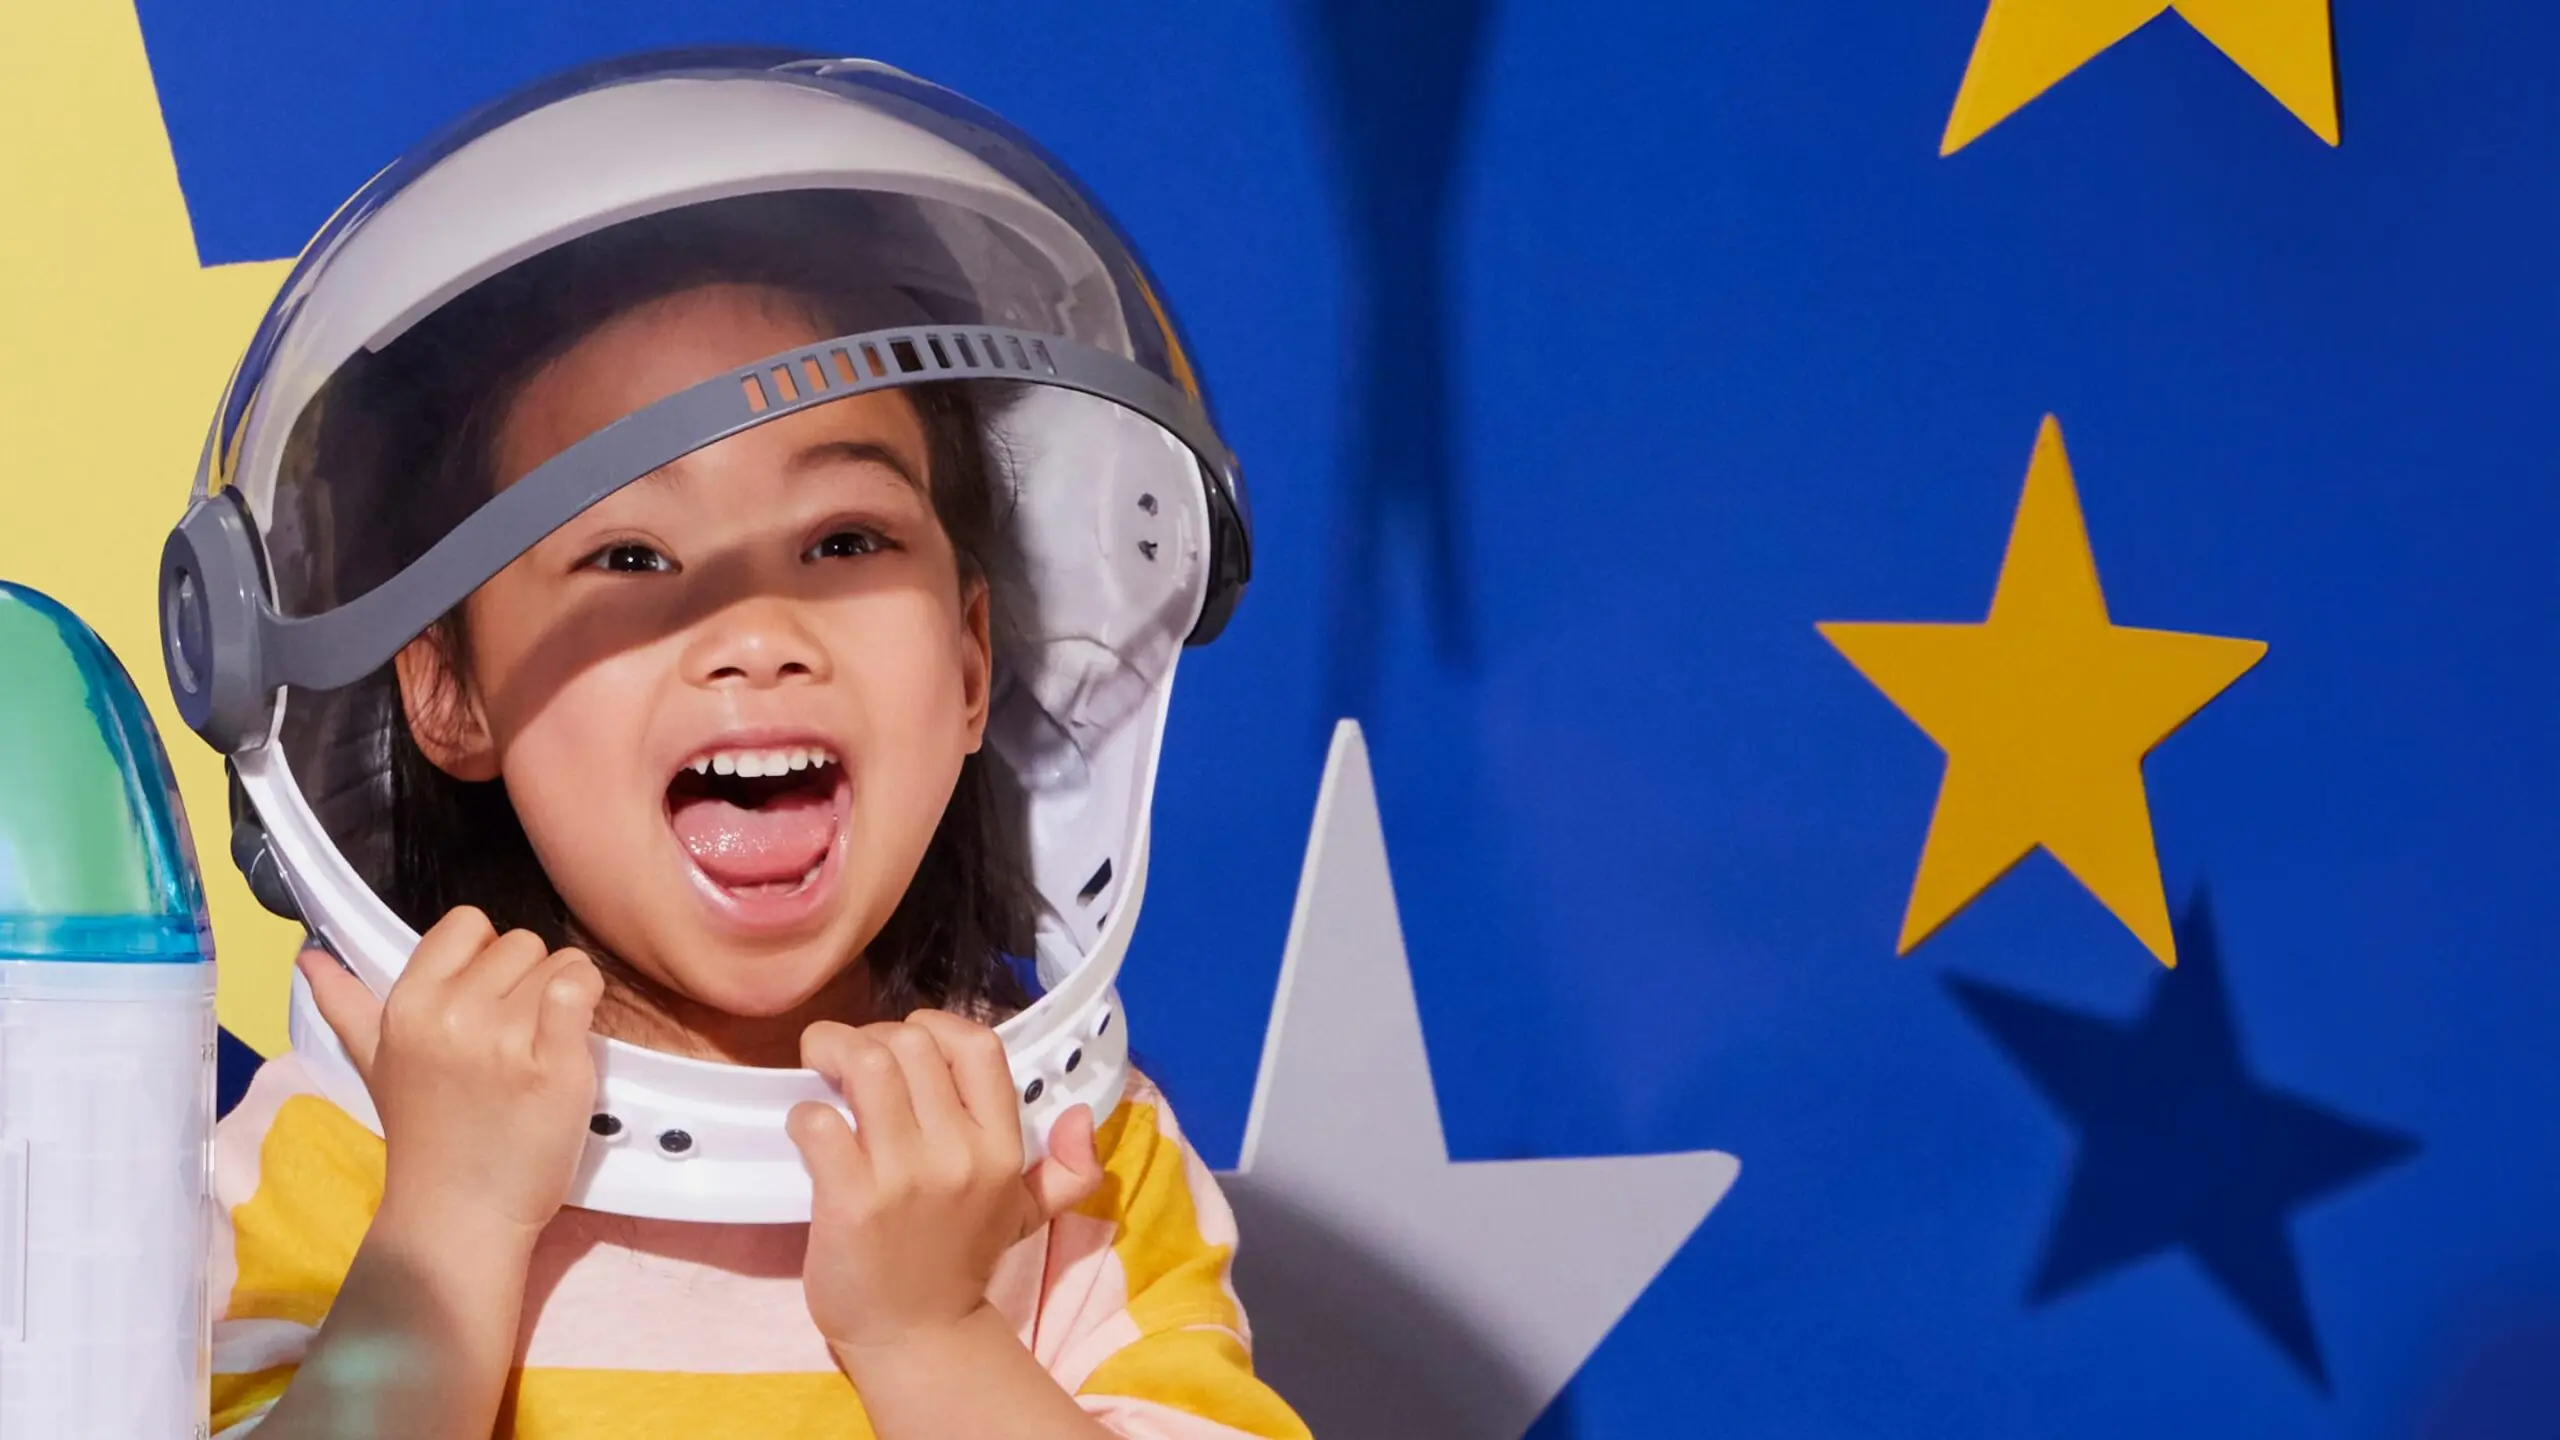 An excited child wearing a helmet in front of a background featuring stars